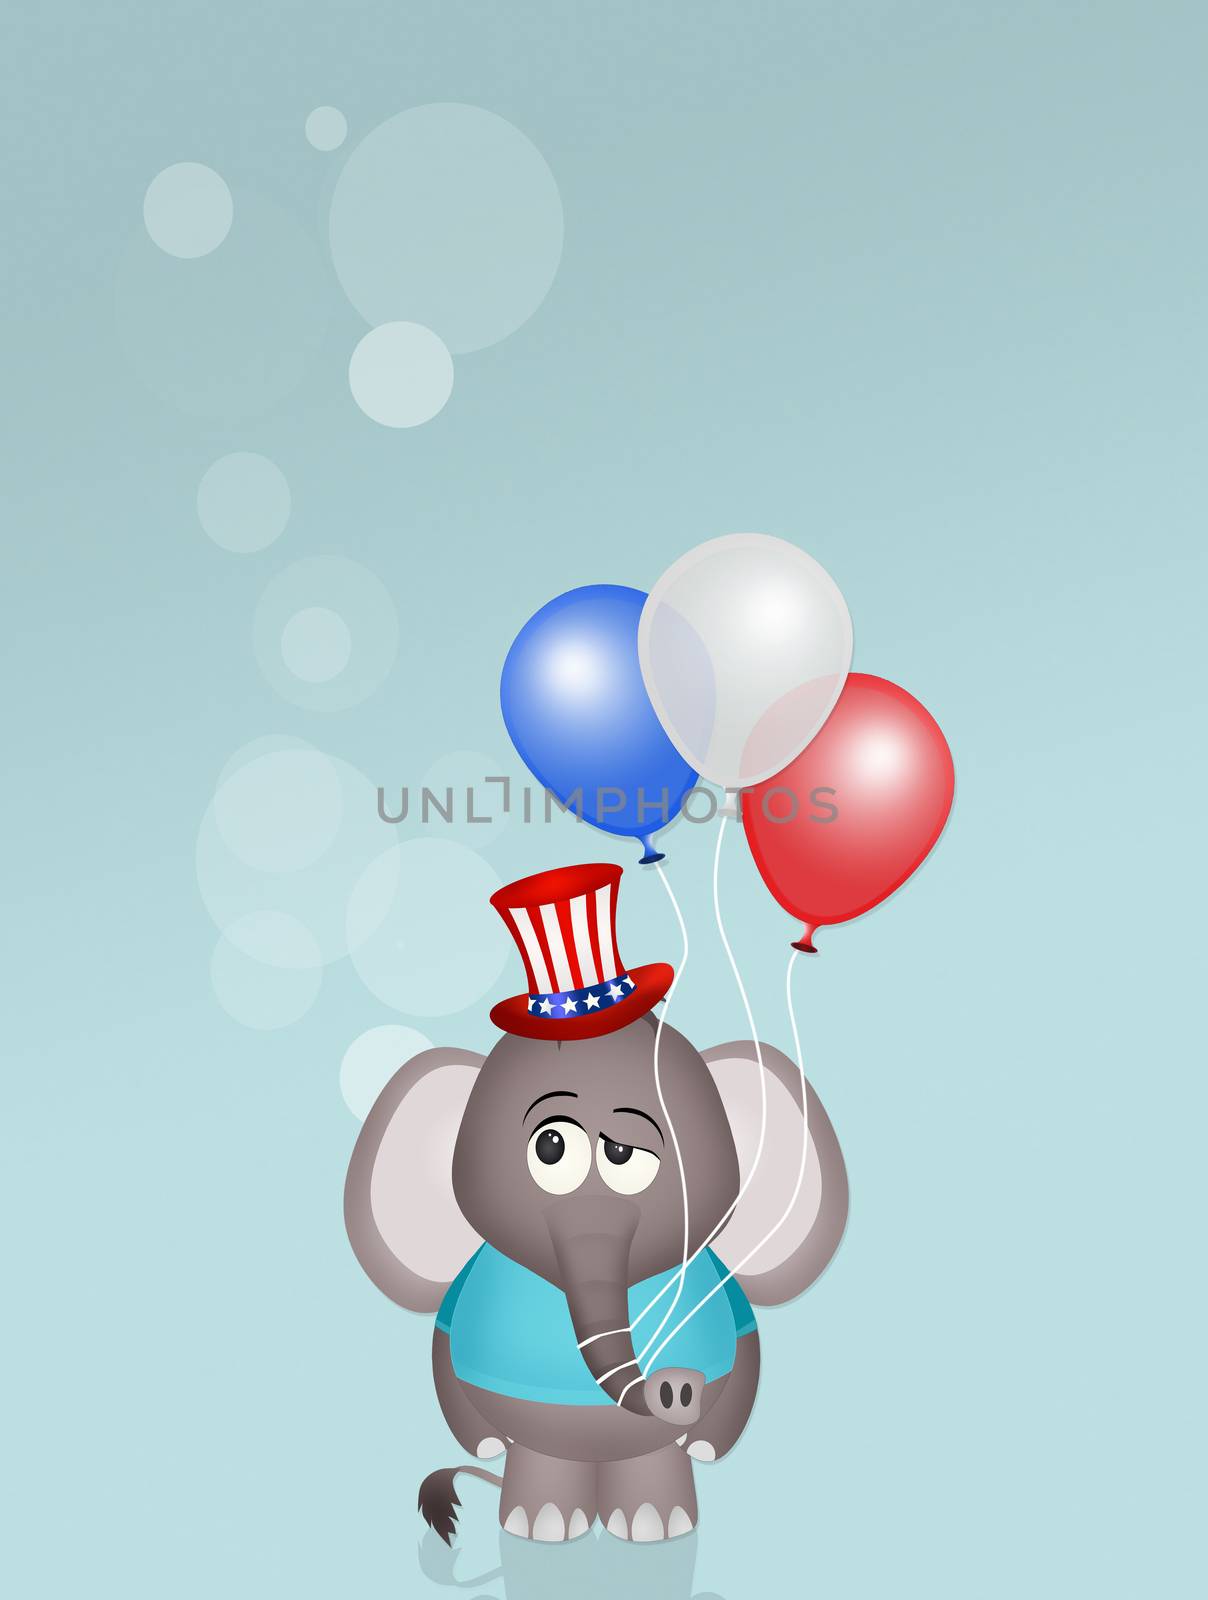 illustration of elephant with balloons for July 4th